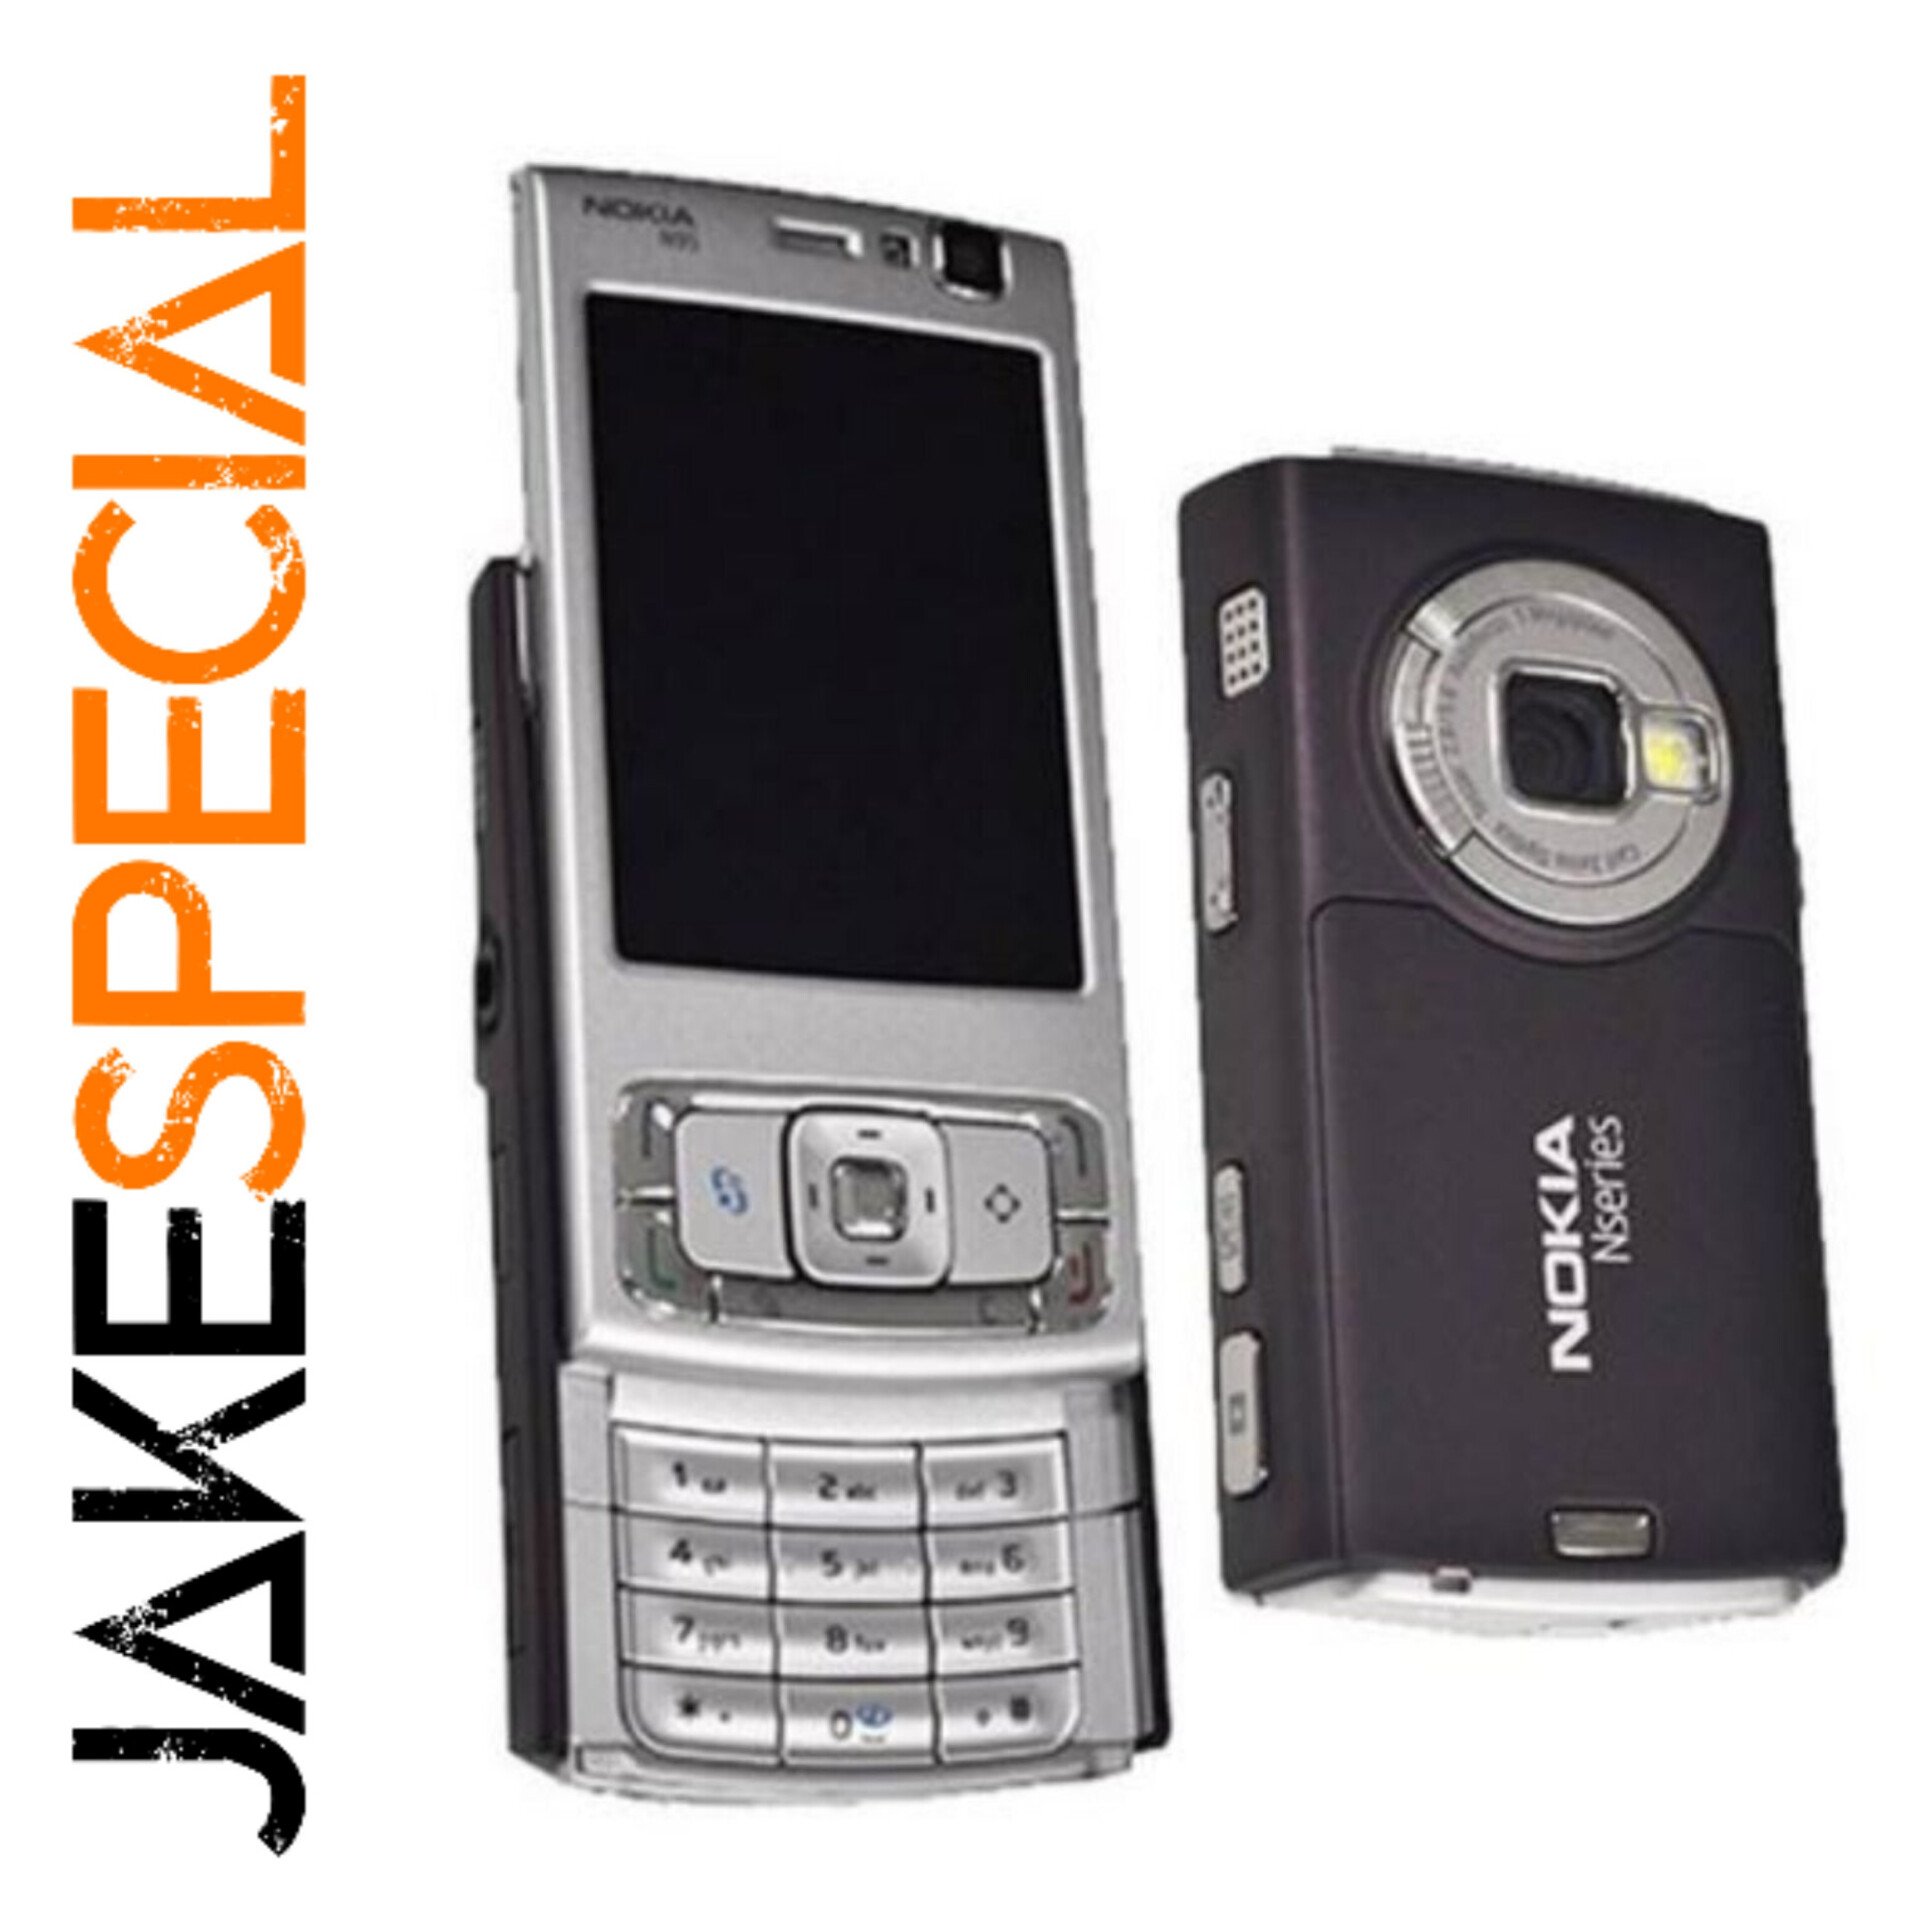 Nokia N95 - Black / Purple - Packaging Available - Fully Operational